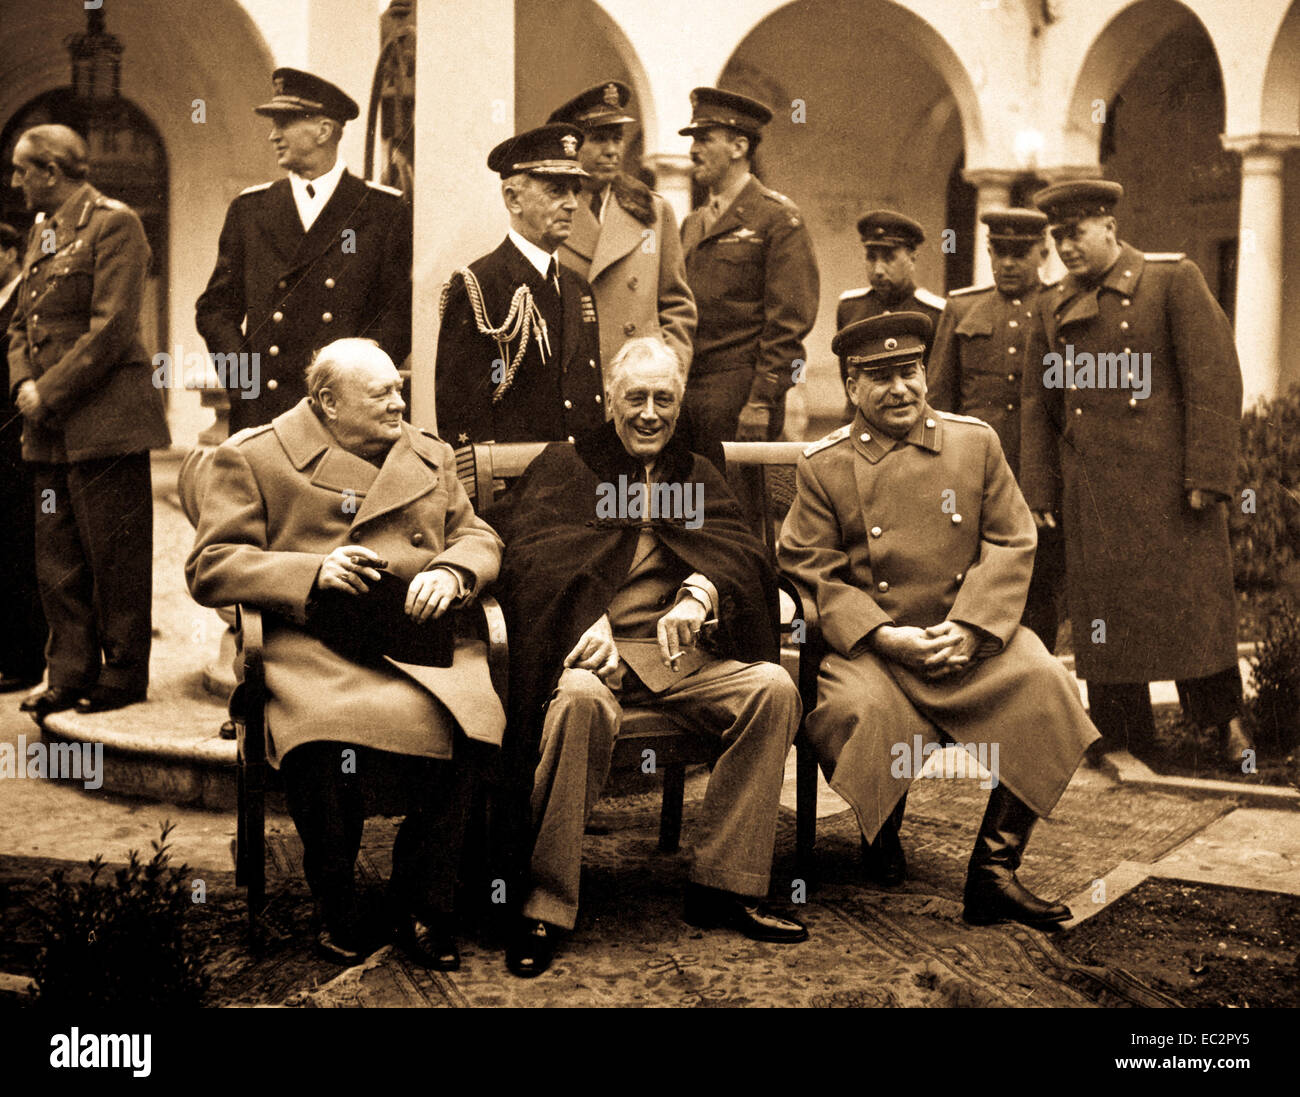 Conference of the Big Three at Yalta as the make final plans for the defeat of Germany.  Here the 'Big Three' sit on the patio together, Prime Minister Winston S. Churchill, President Franklin D. Roosevelt, and Premier Josef Stalin.  February 1945. Stock Photo